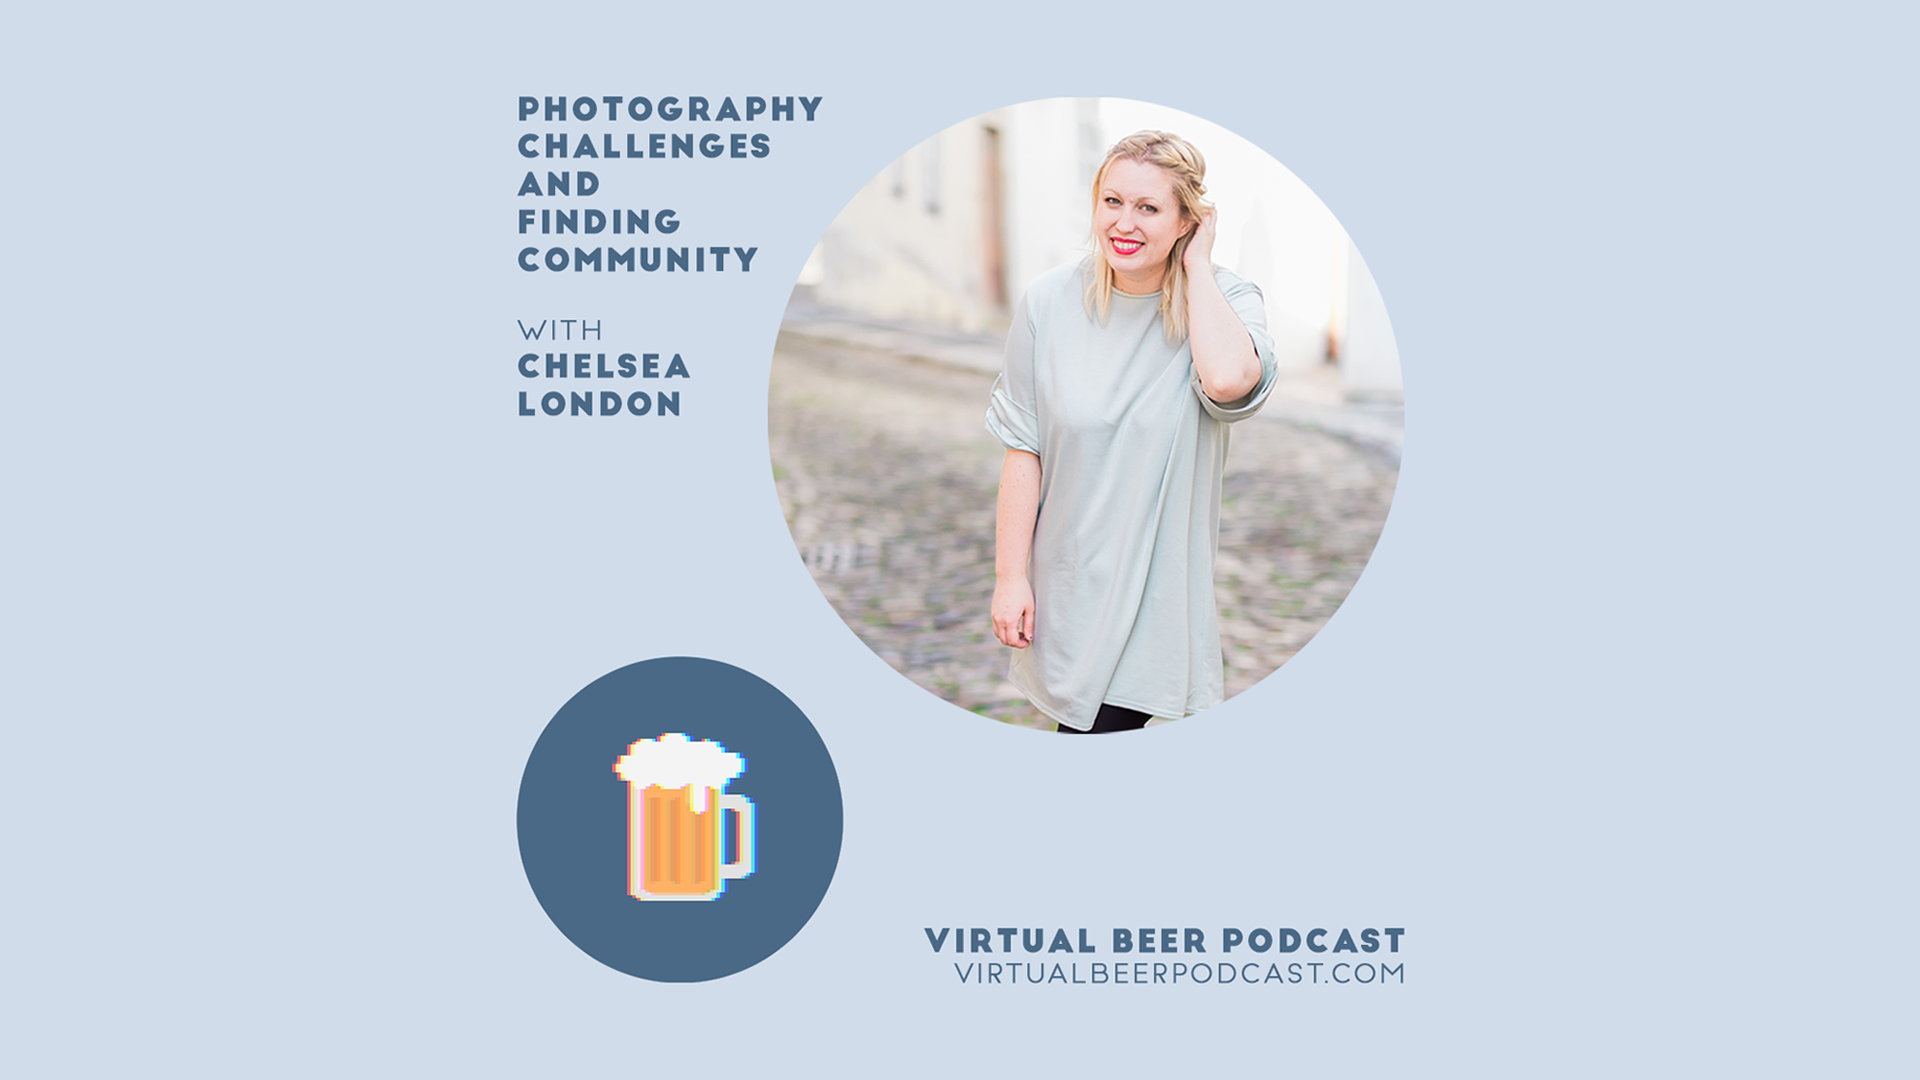 Photography challenges and finding community, with photographer Chelsea London